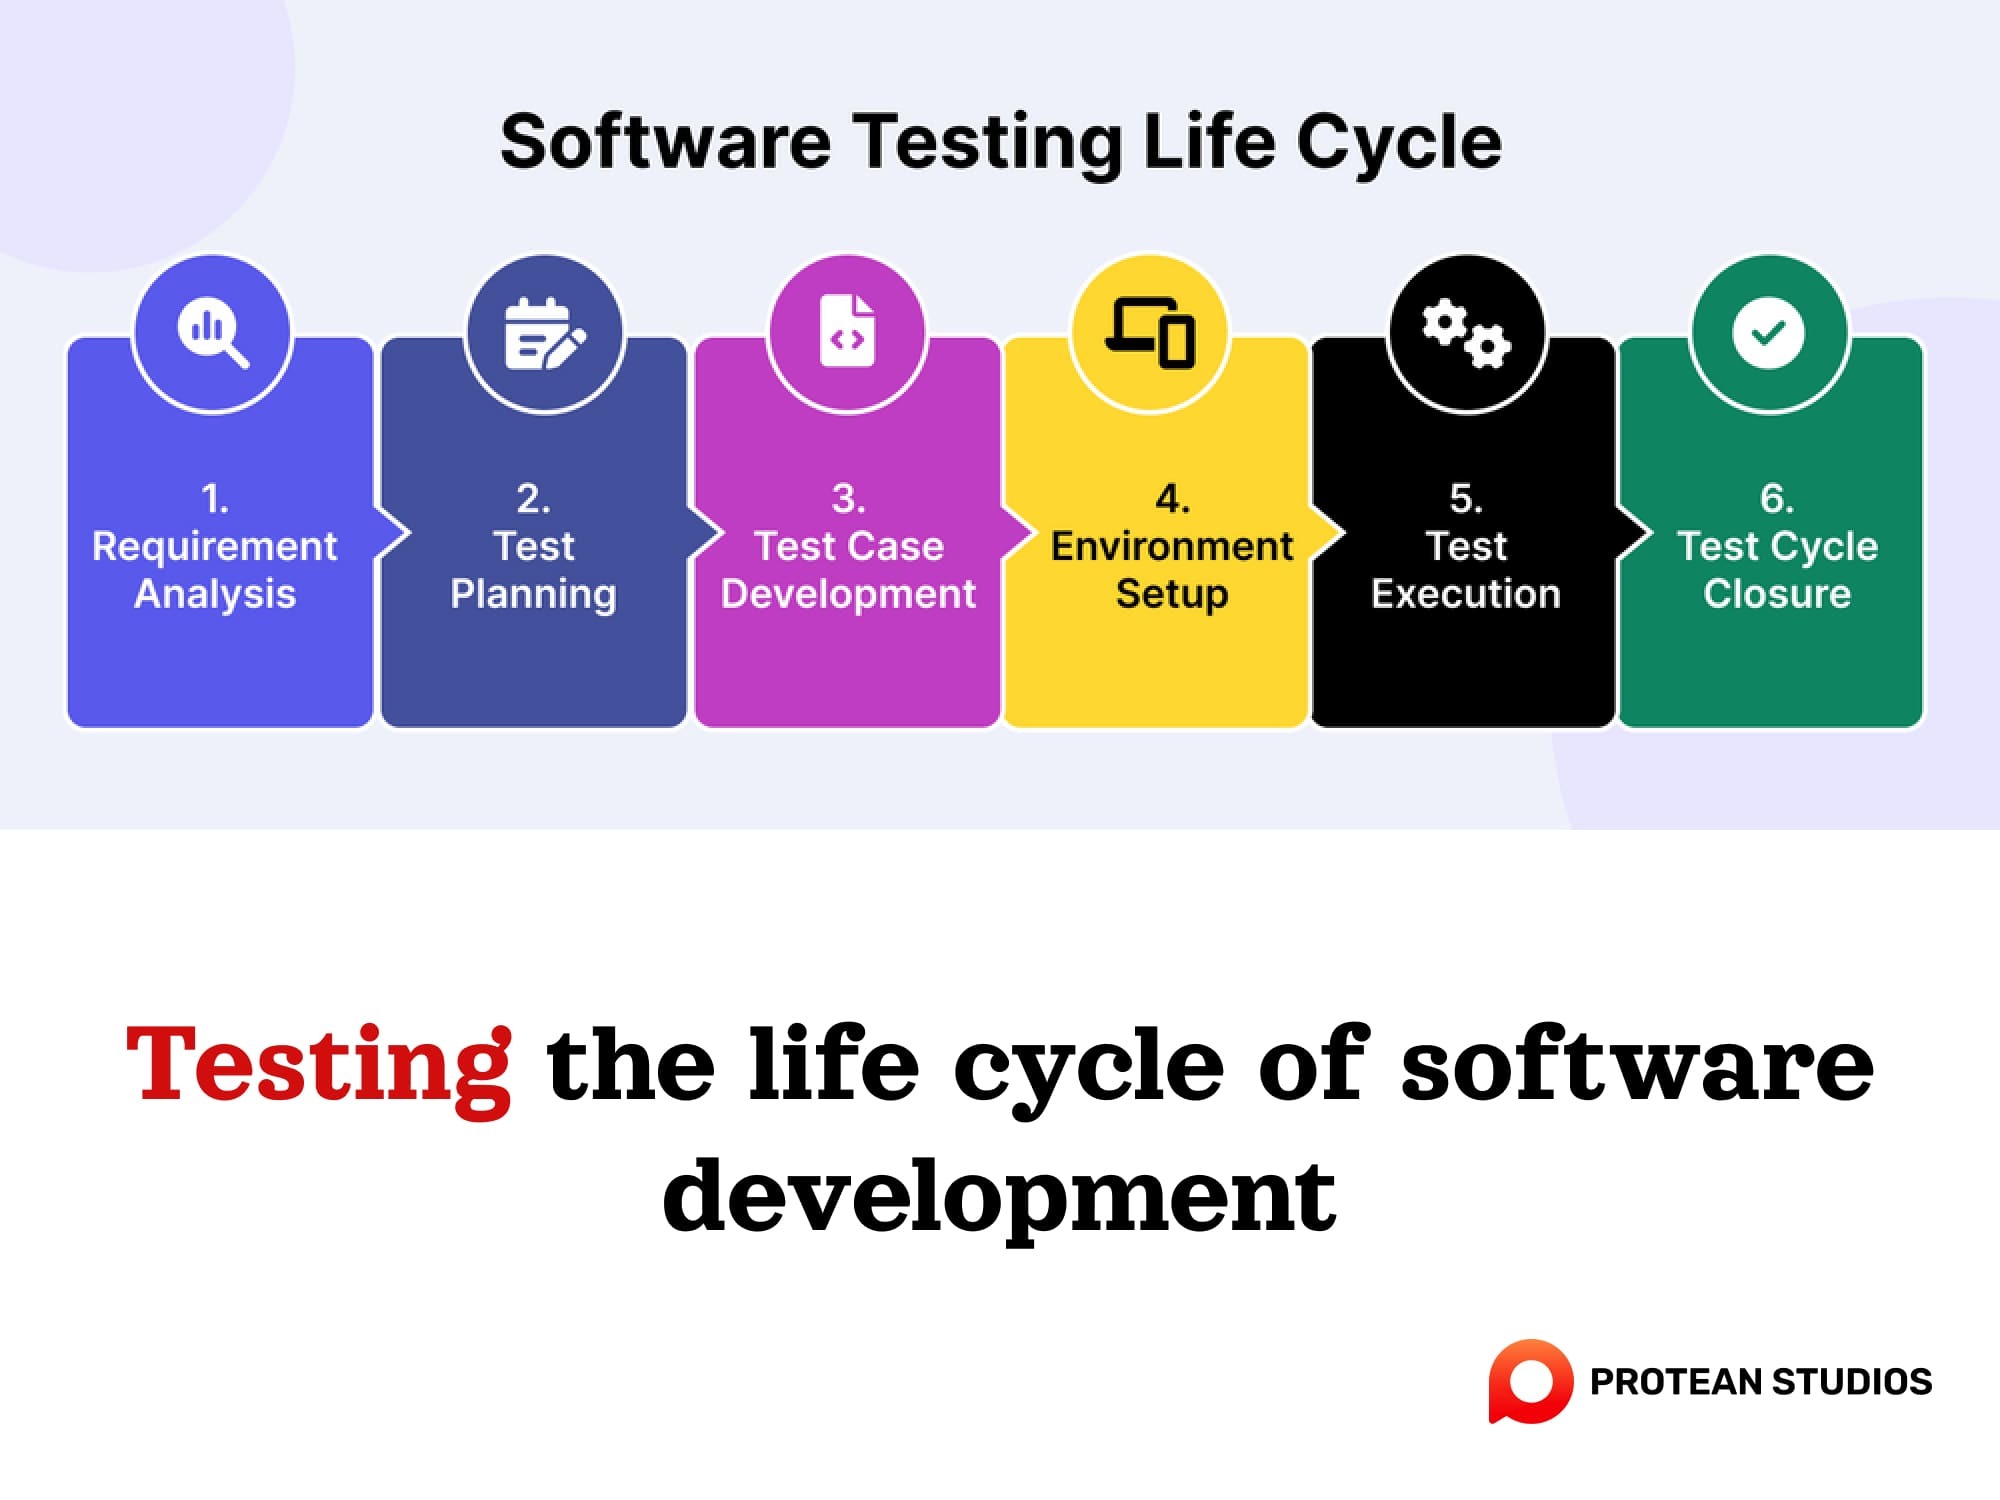 The testing life cycle of software development